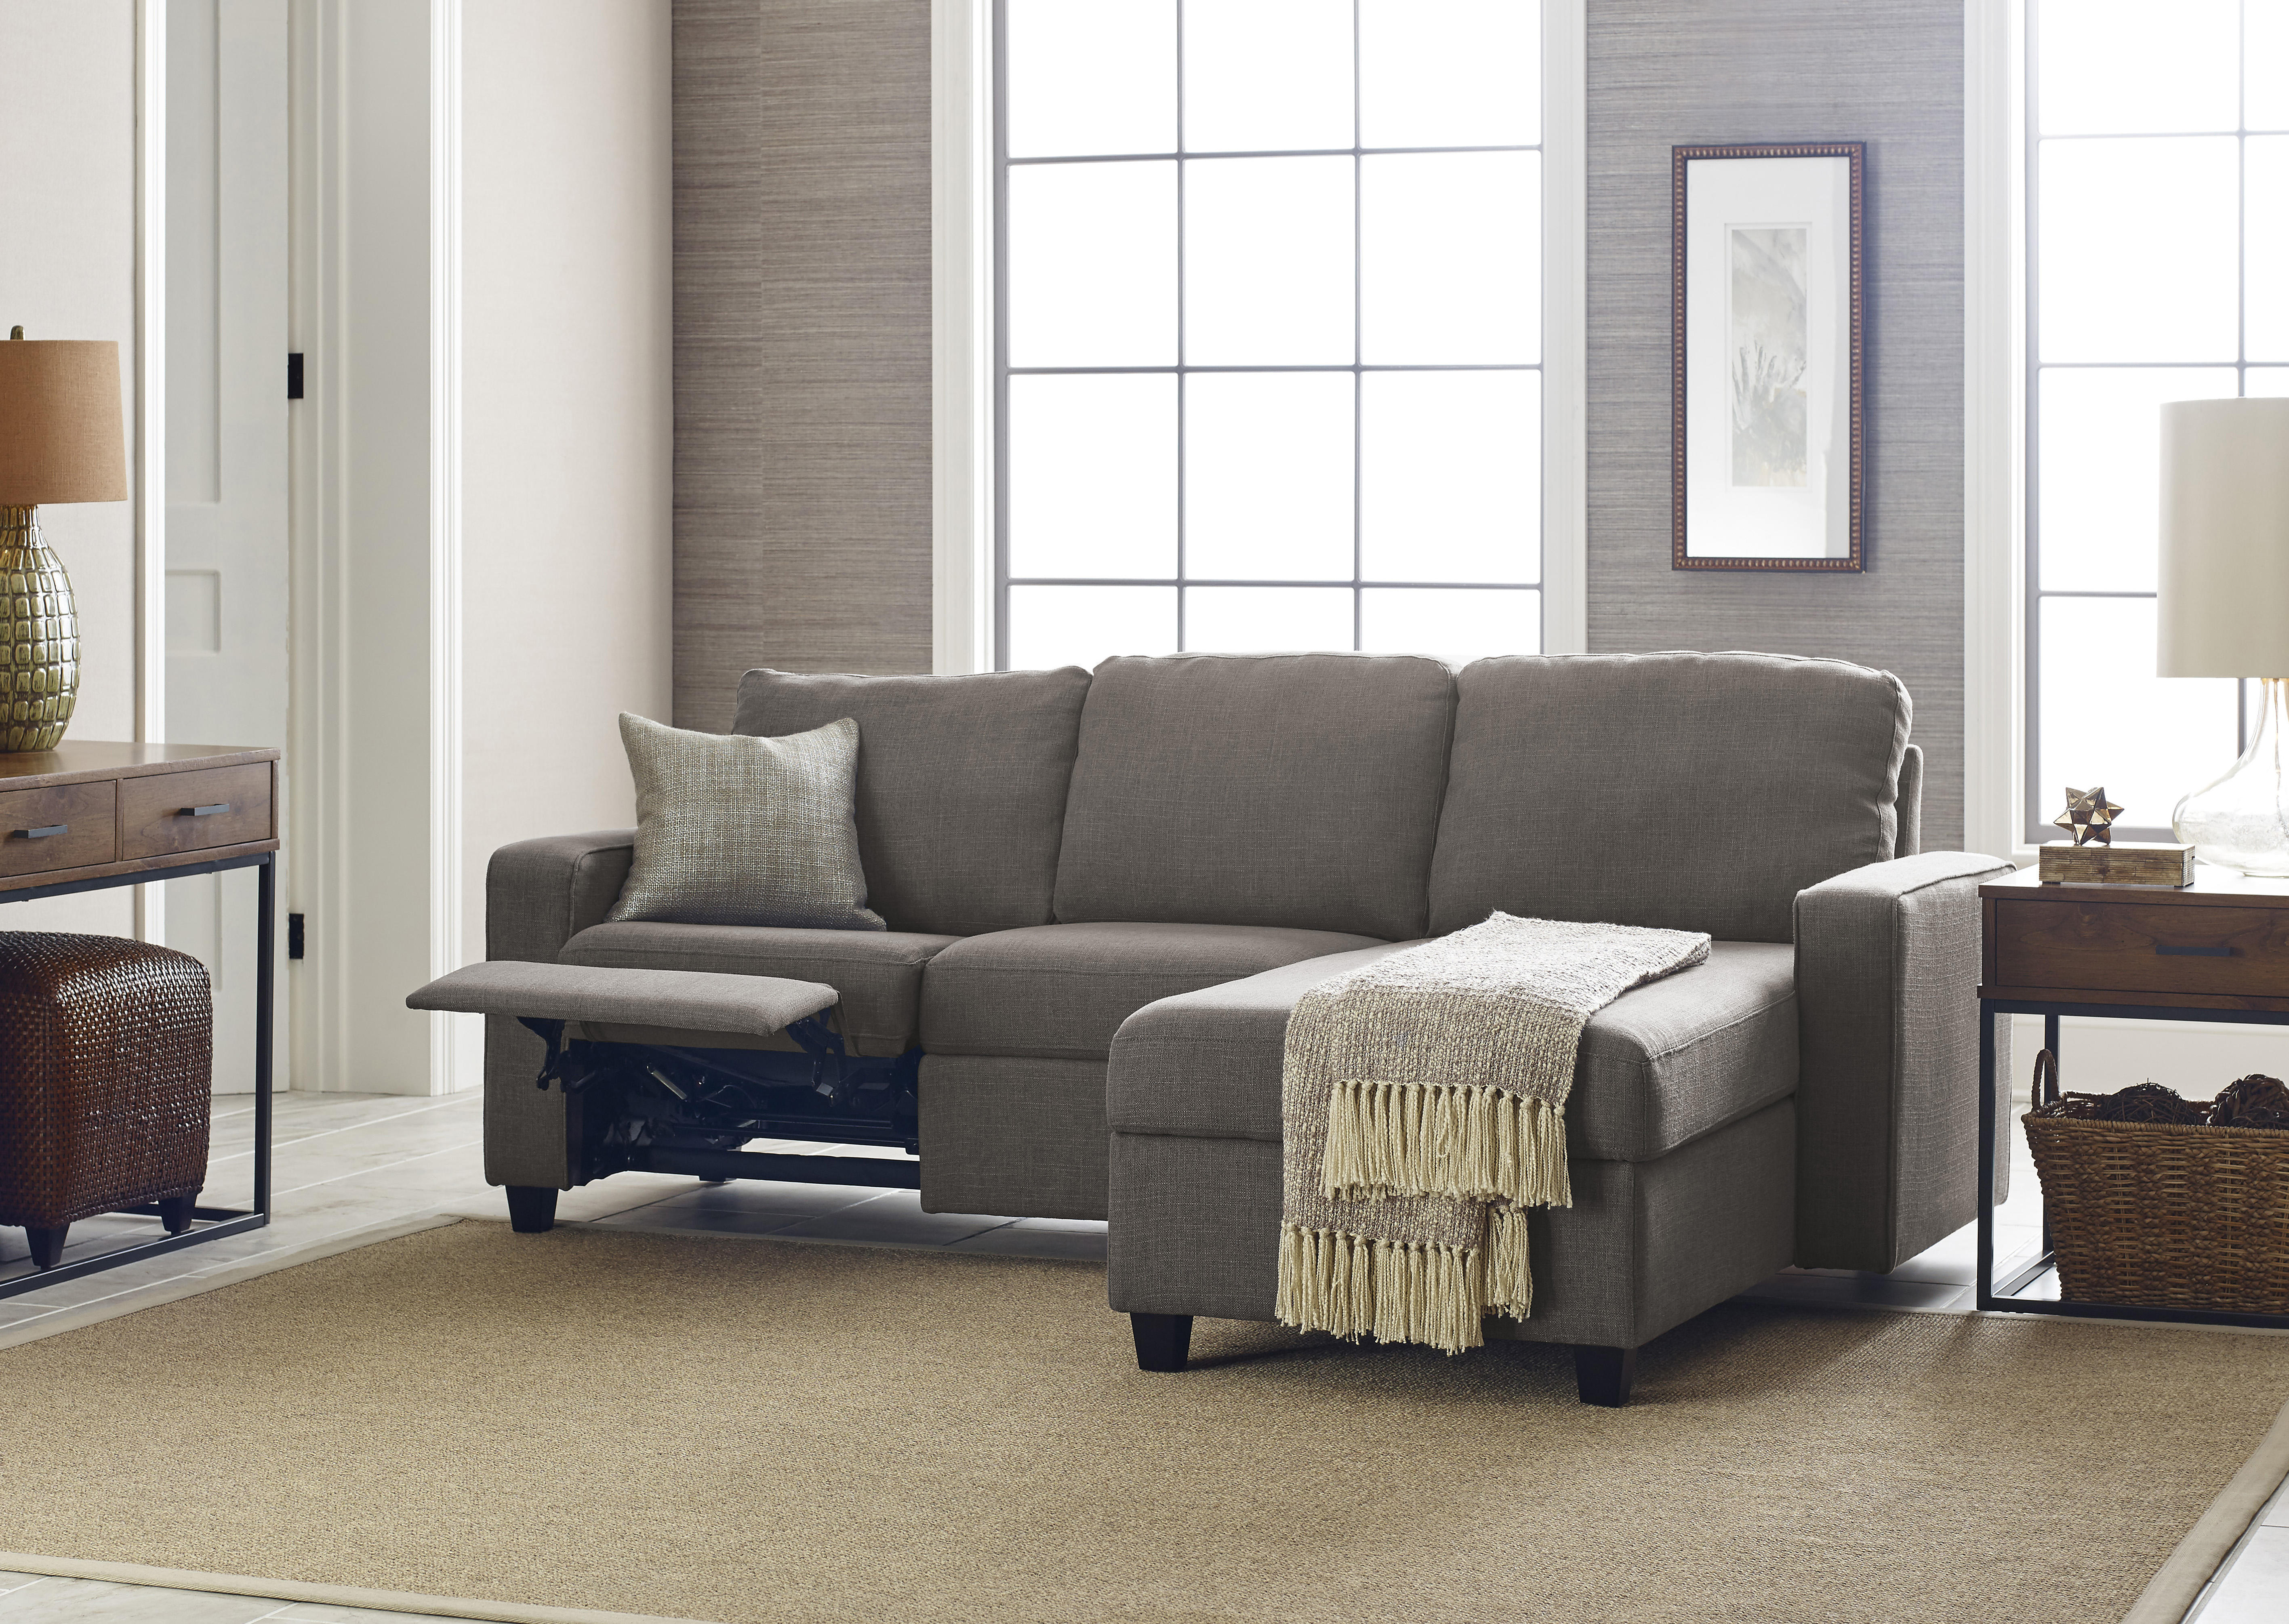 Serta Palisades Reclining Sectional with Right Storage Chaise - Gray - image 1 of 9